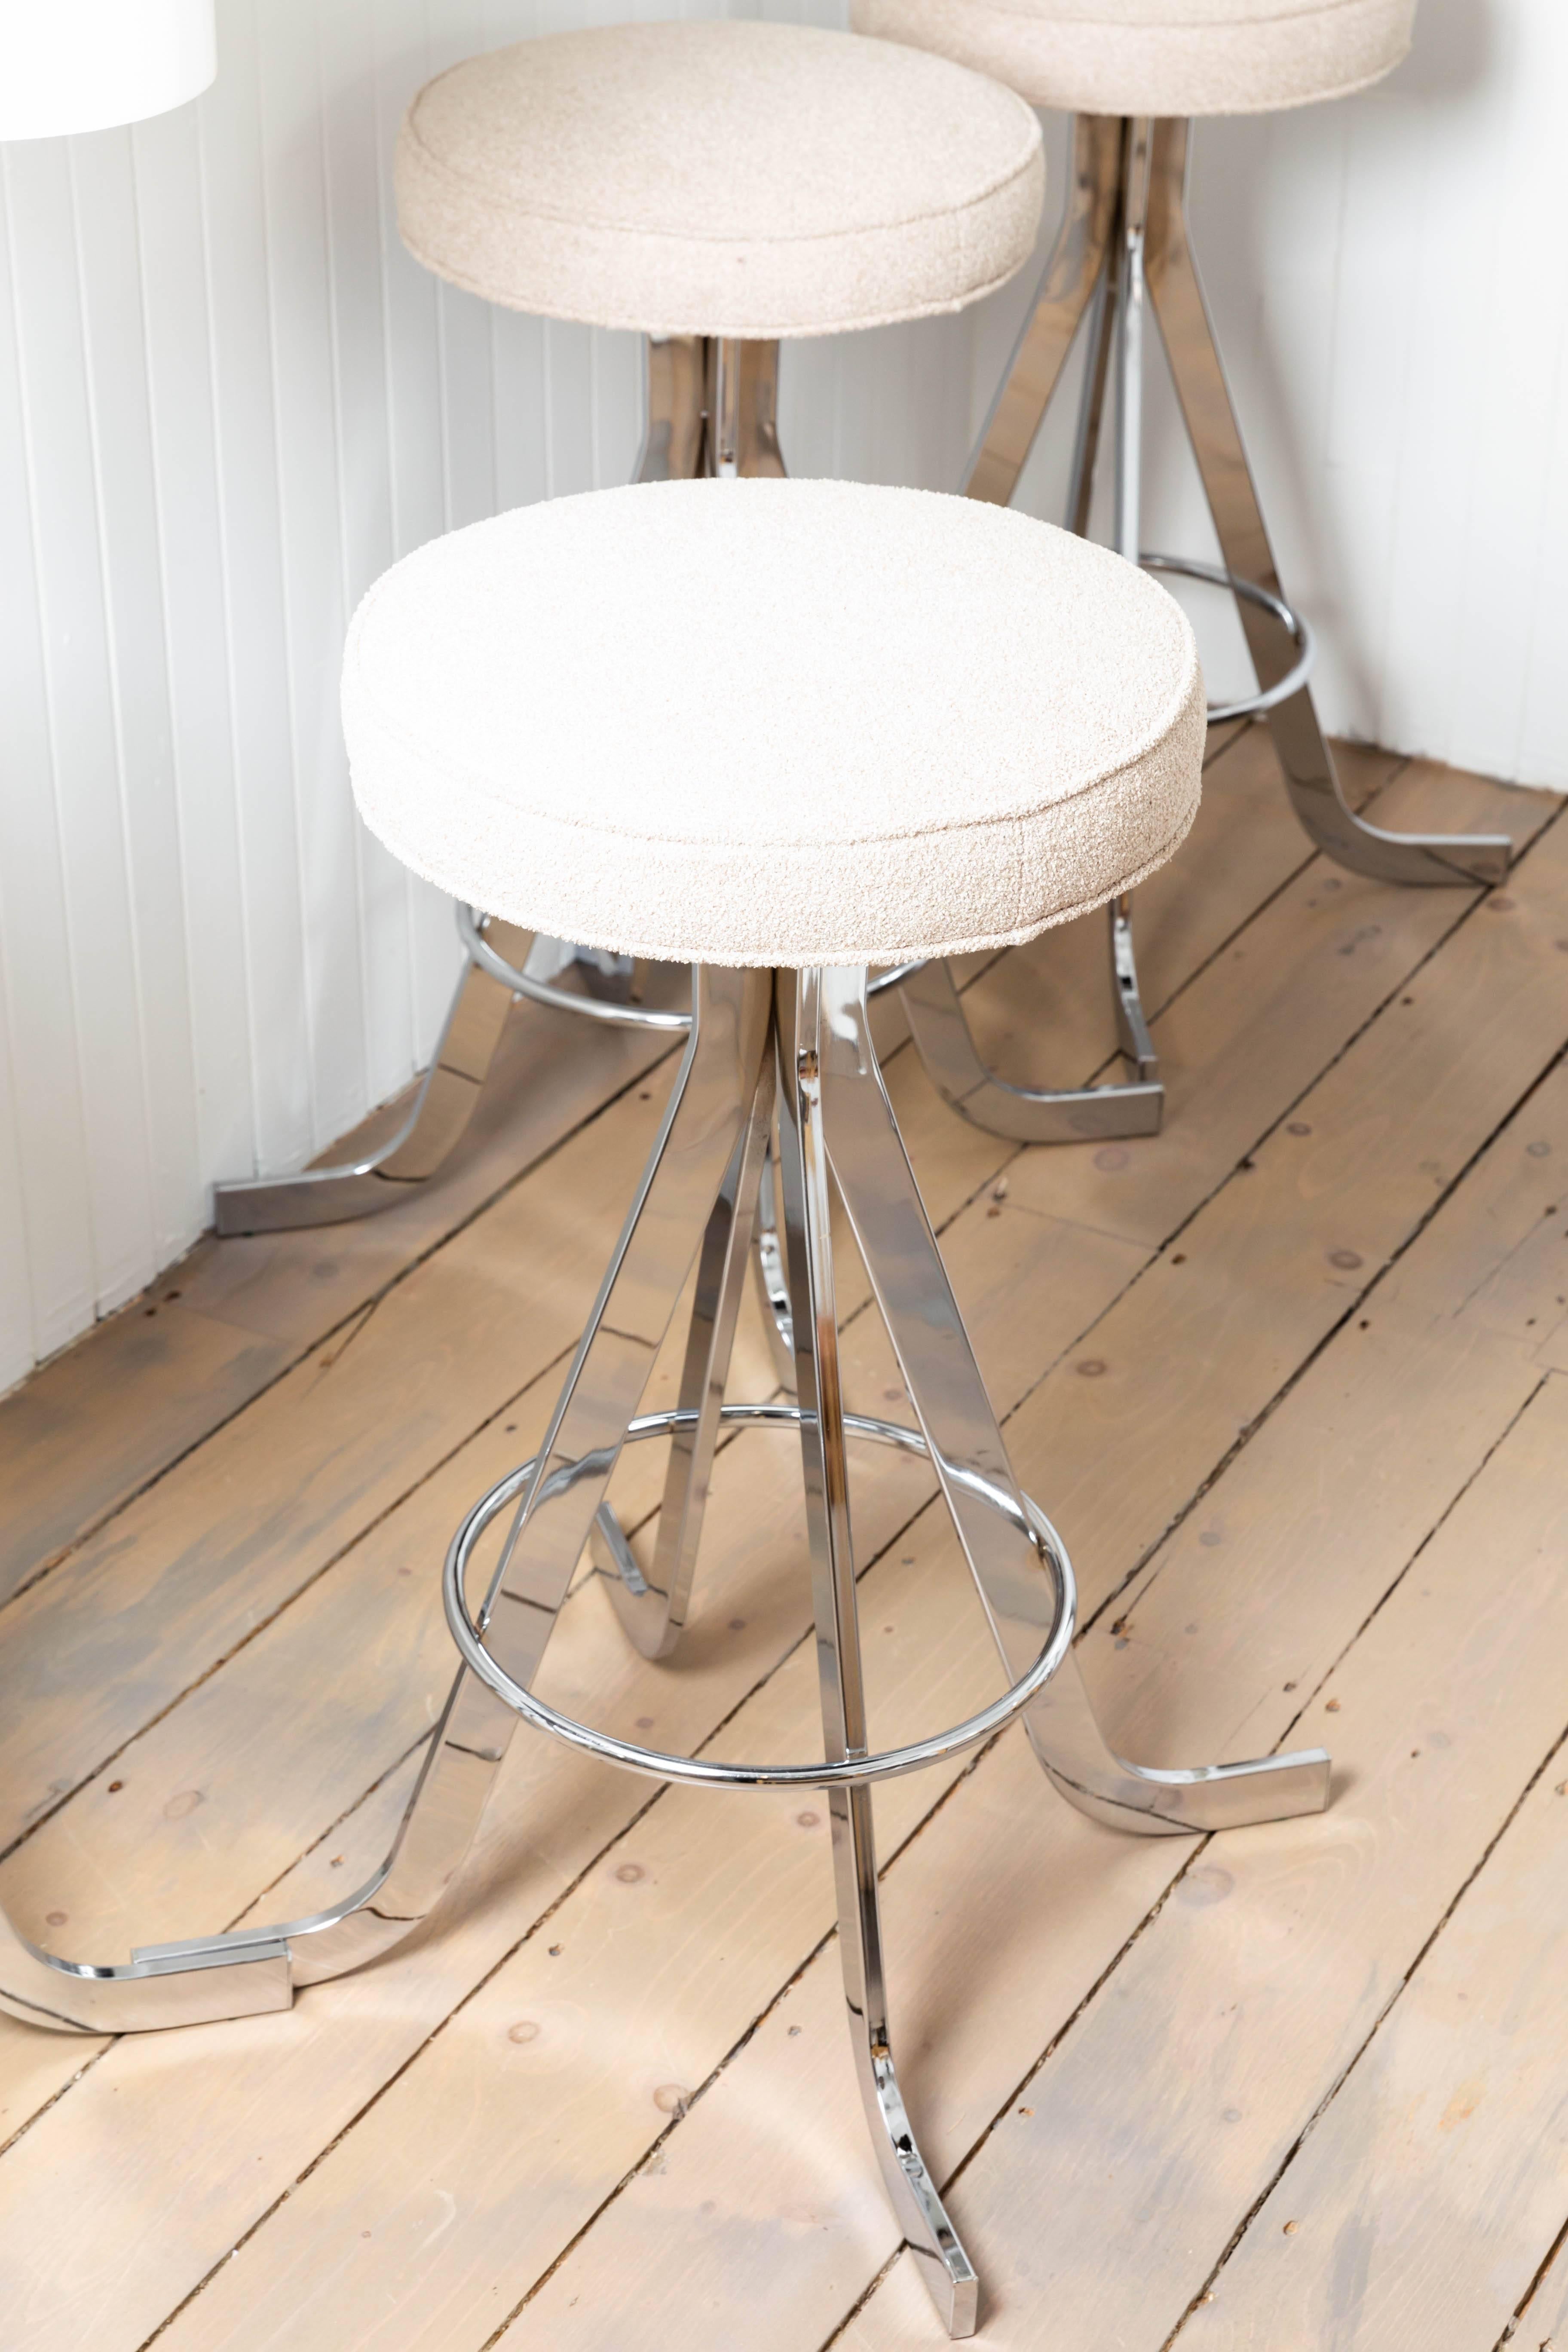 20th Century Set of Four Polished Nickel Stools with Upholstered Circular Seats